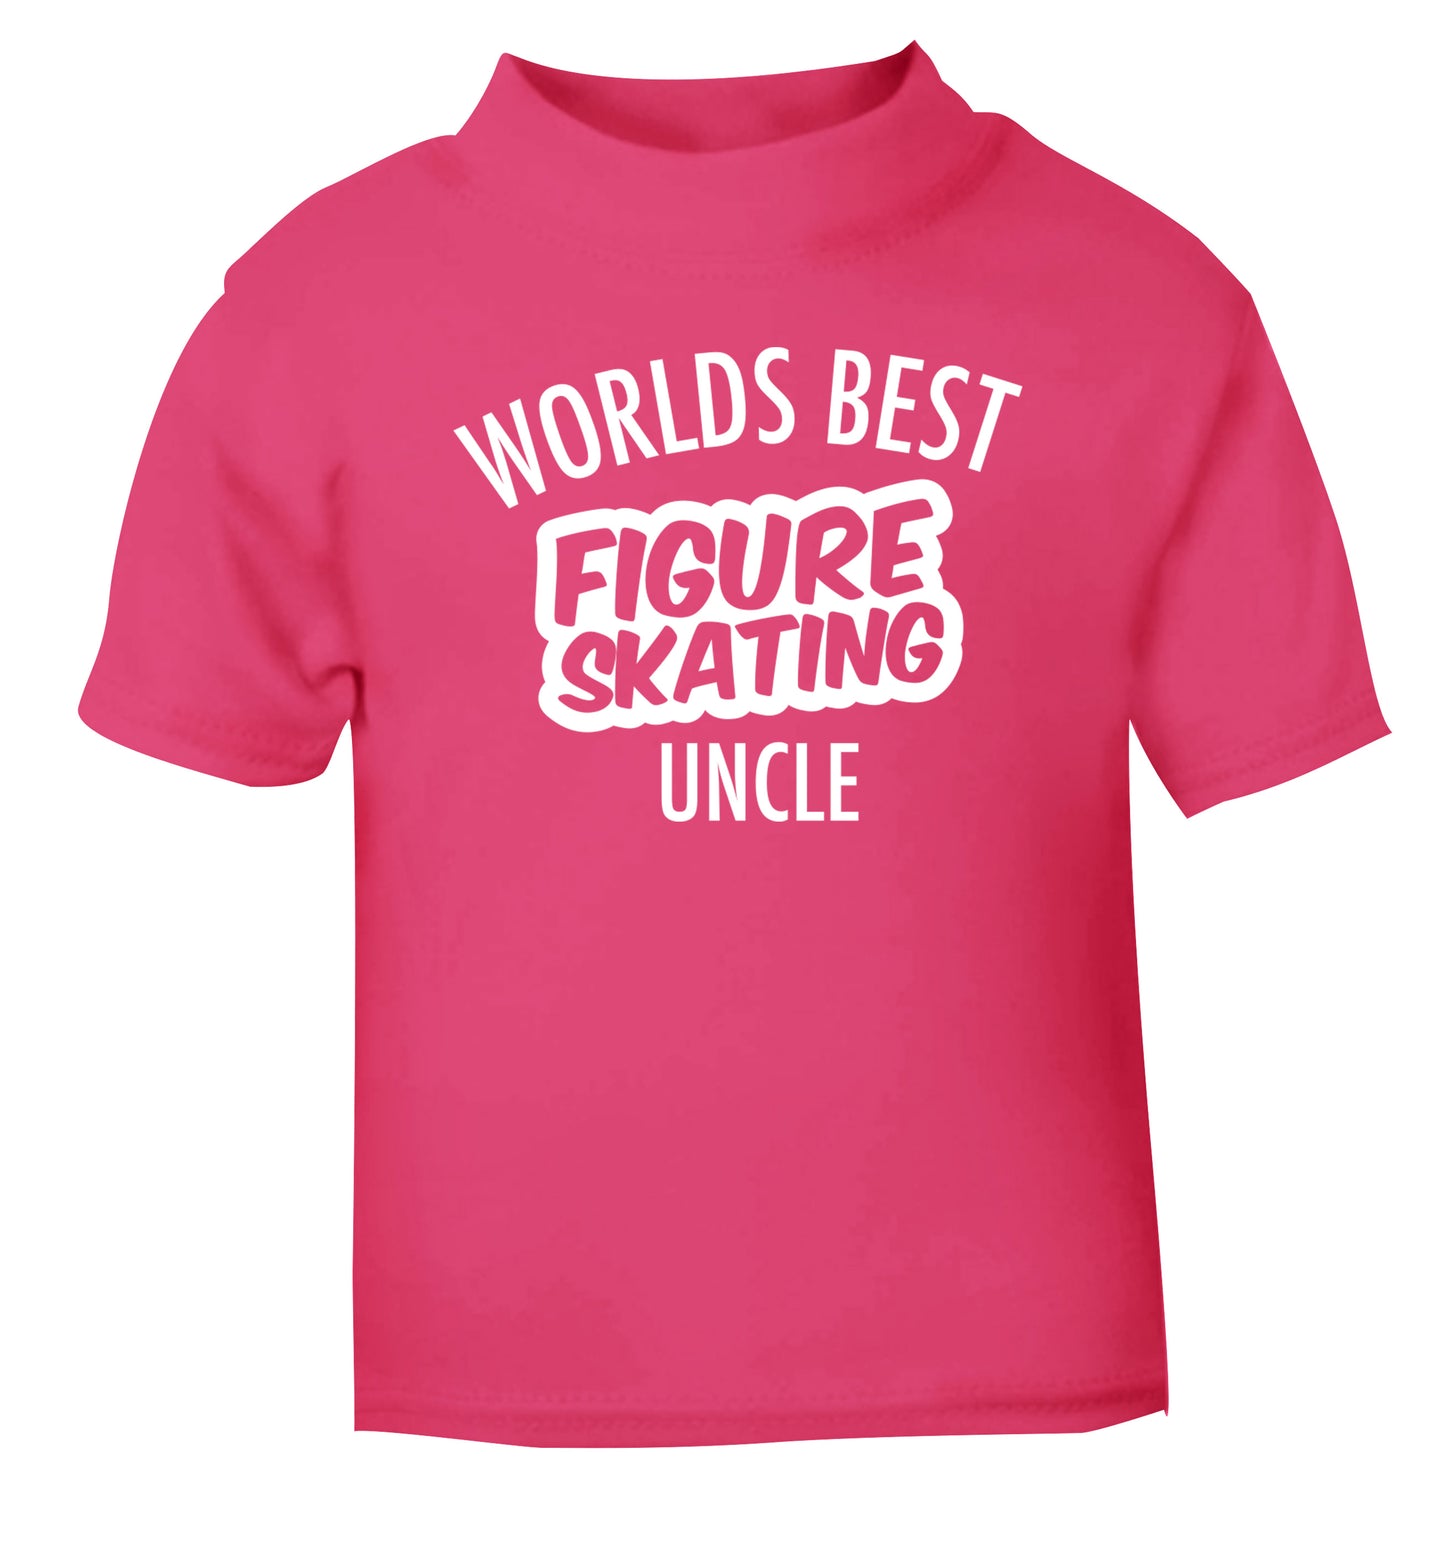 Worlds best figure skating uncle pink Baby Toddler Tshirt 2 Years